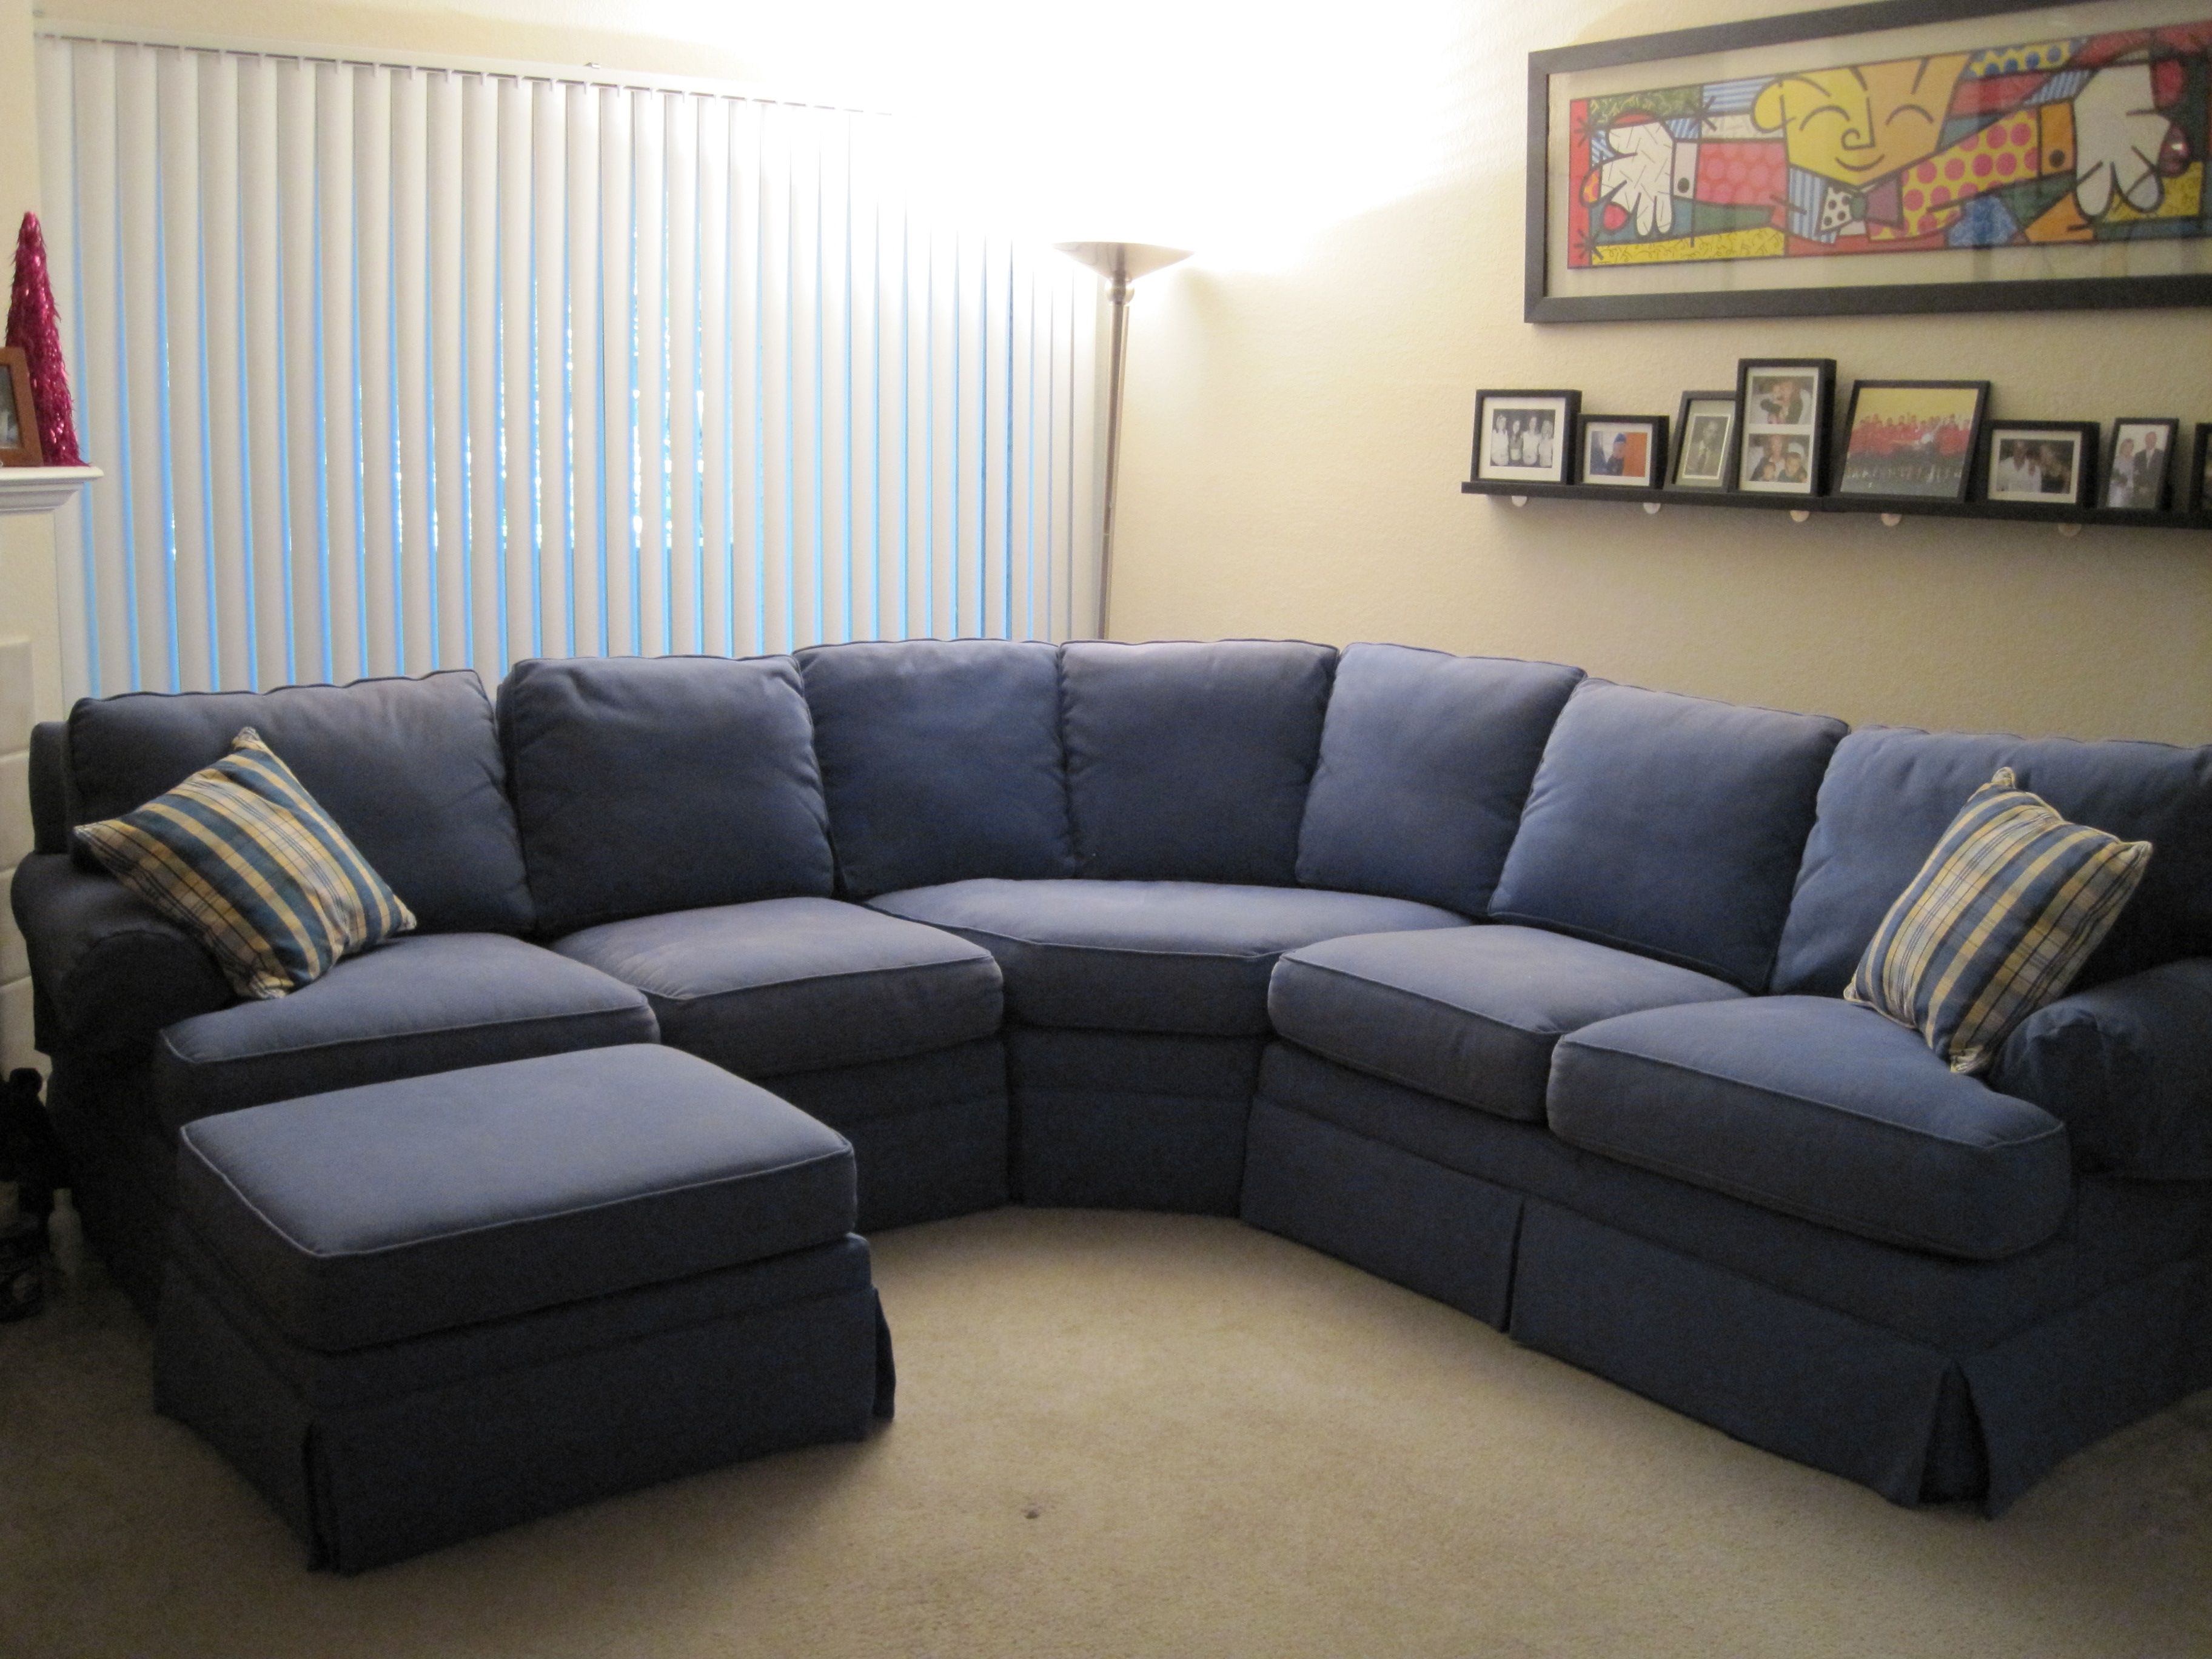 Attractive Couches Design Sofa Curved Sectional Sofa To D And With Widely Used Blue U Shaped Sectionals (View 1 of 15)